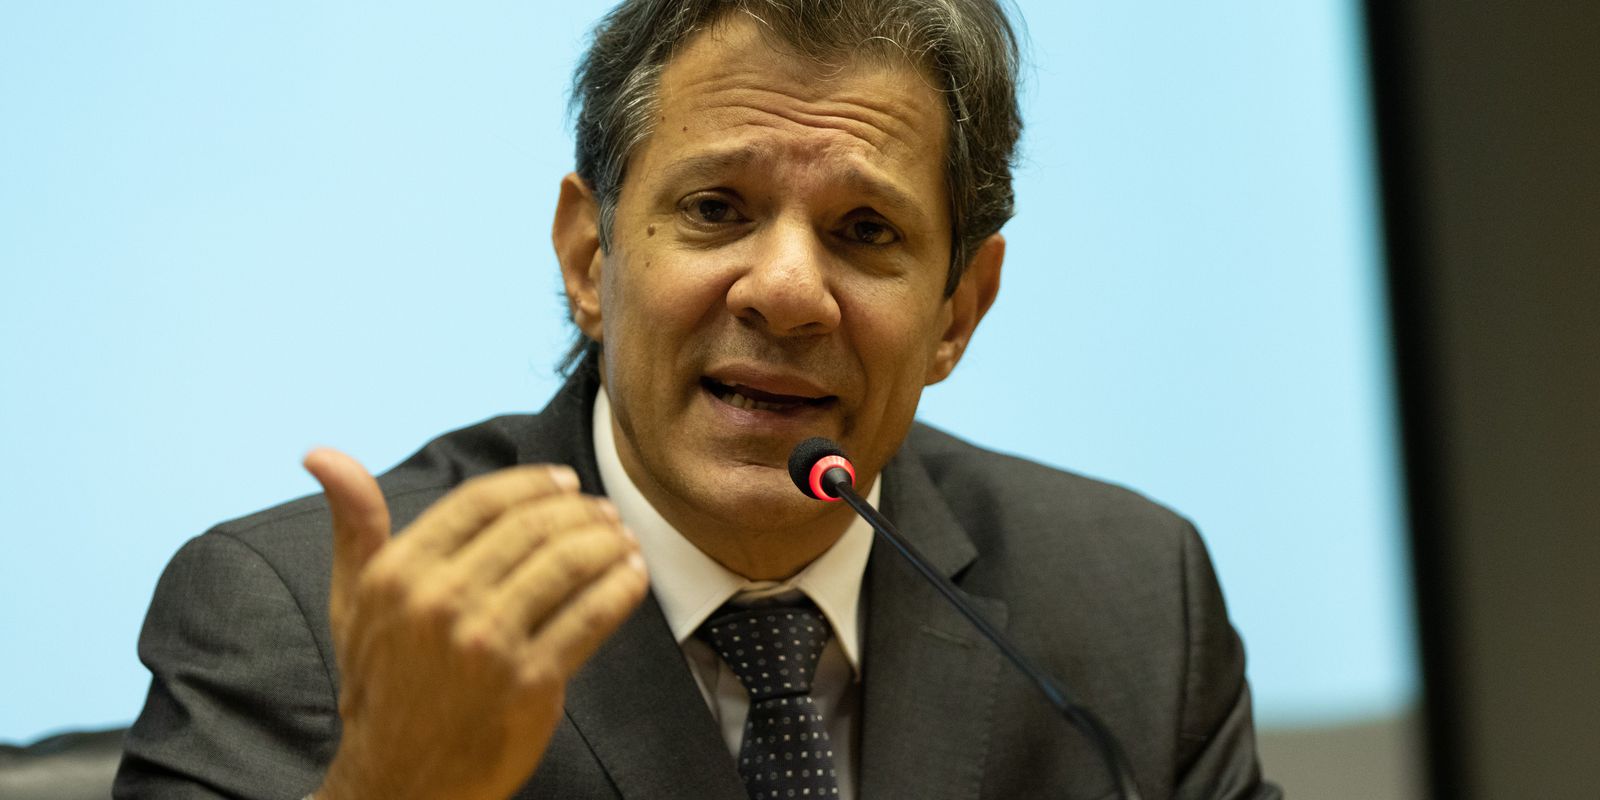 Haddad admits slowdown, but rules out risk of recession